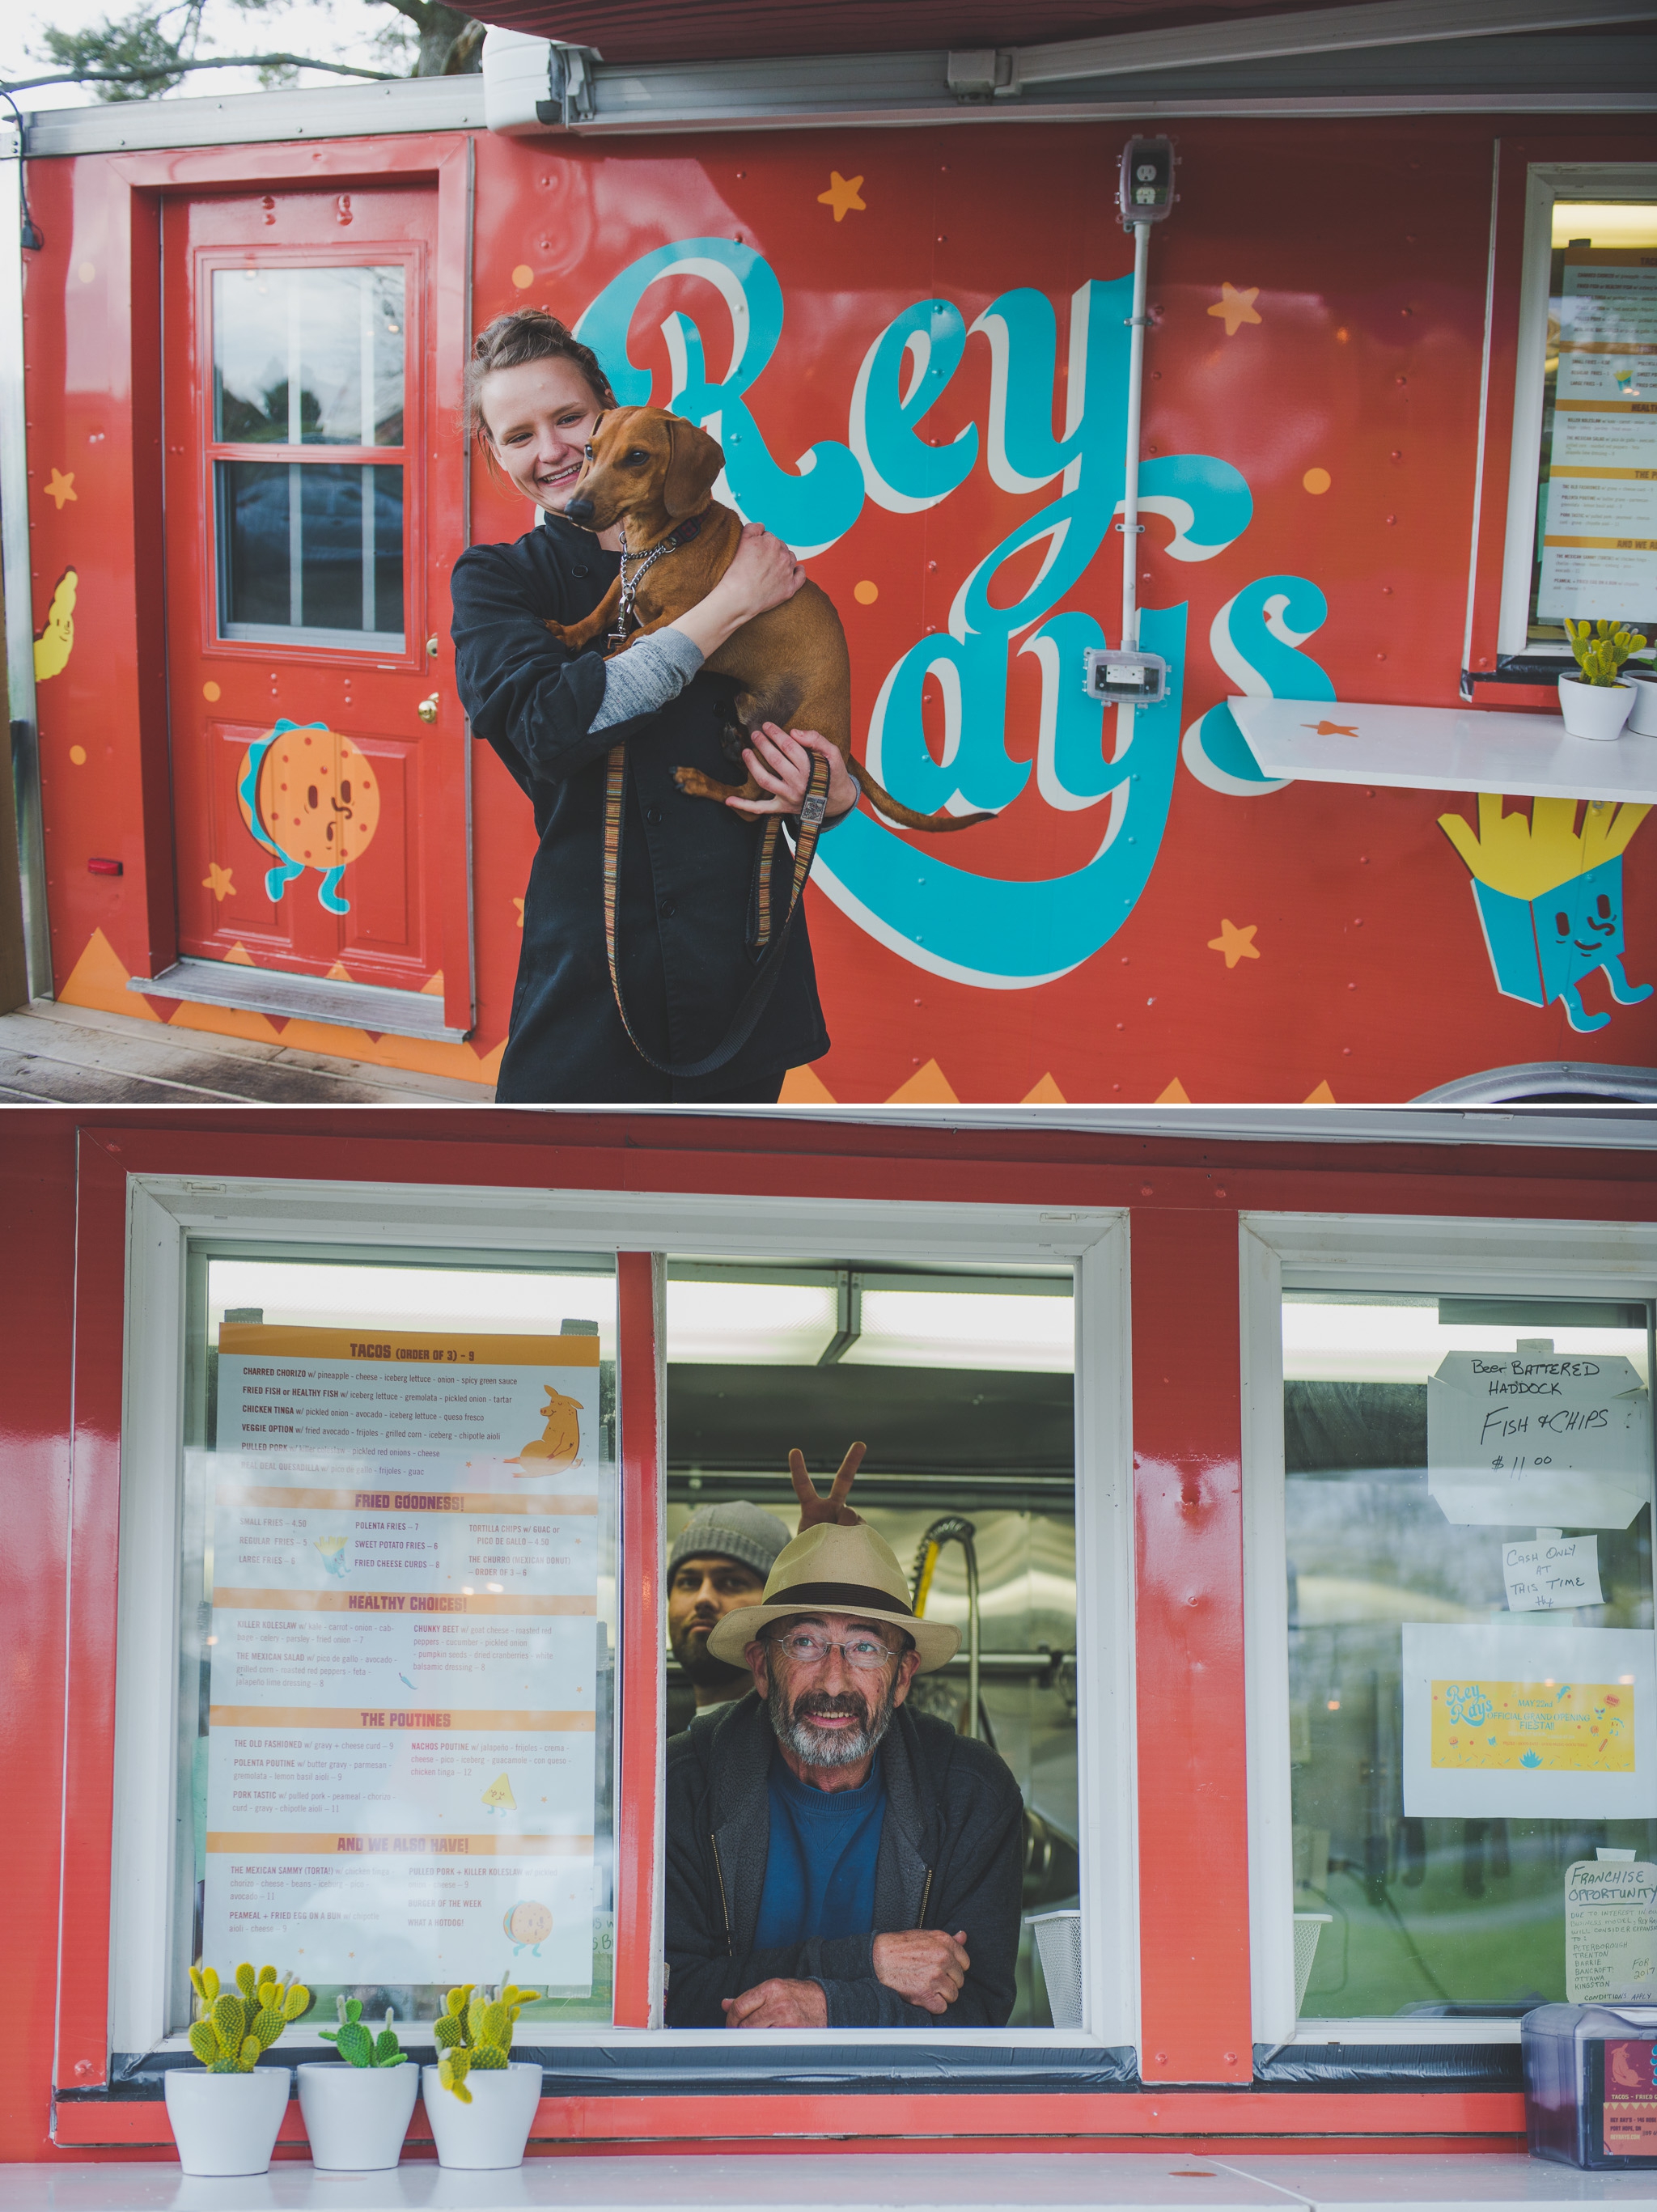 Lifestyle photography, northumberland county, port hope photographer, cobourg photographer, toronto photographer, food photographer, food photography, food truck, mexican, tacos, healthy, vegetarian, rey rays, portrait